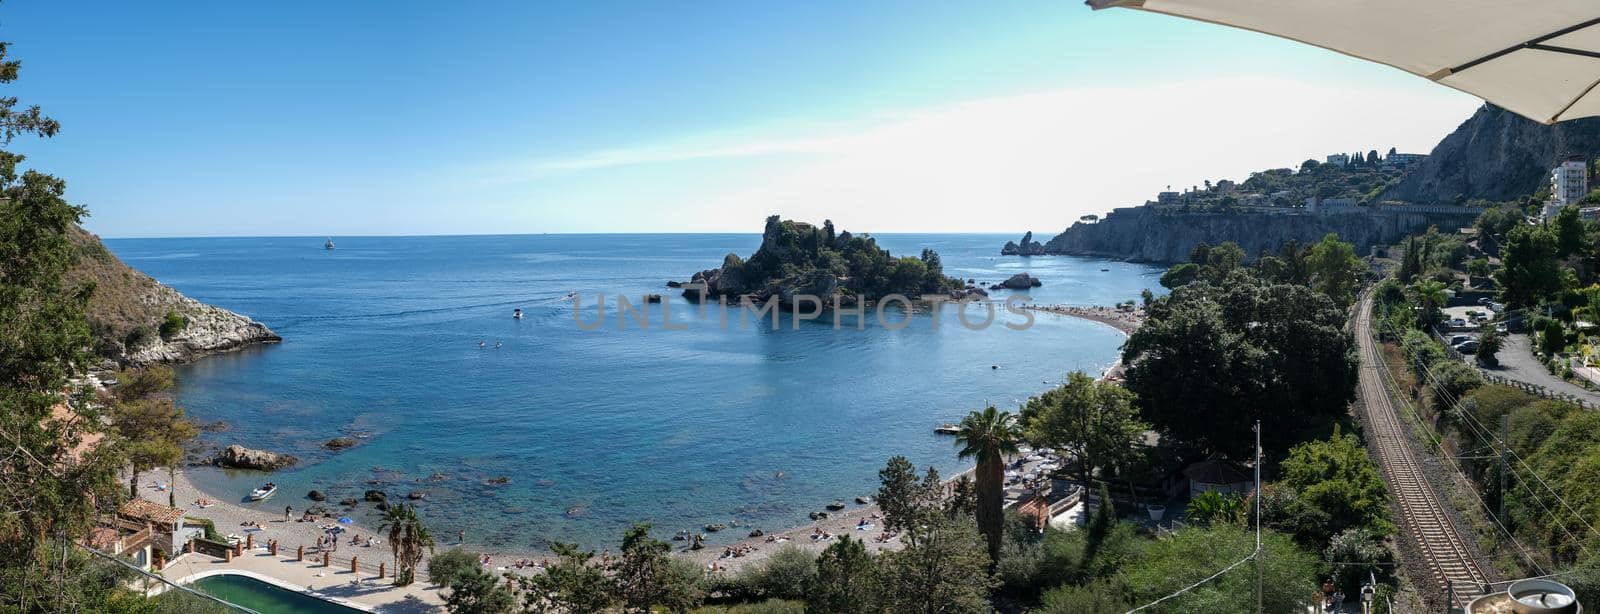 Isola Bella at Taormina, Sicily, Aerial view of island and Isola Bella beach and blue ocean water in Taormina, Sicily, Italy by fokkebok